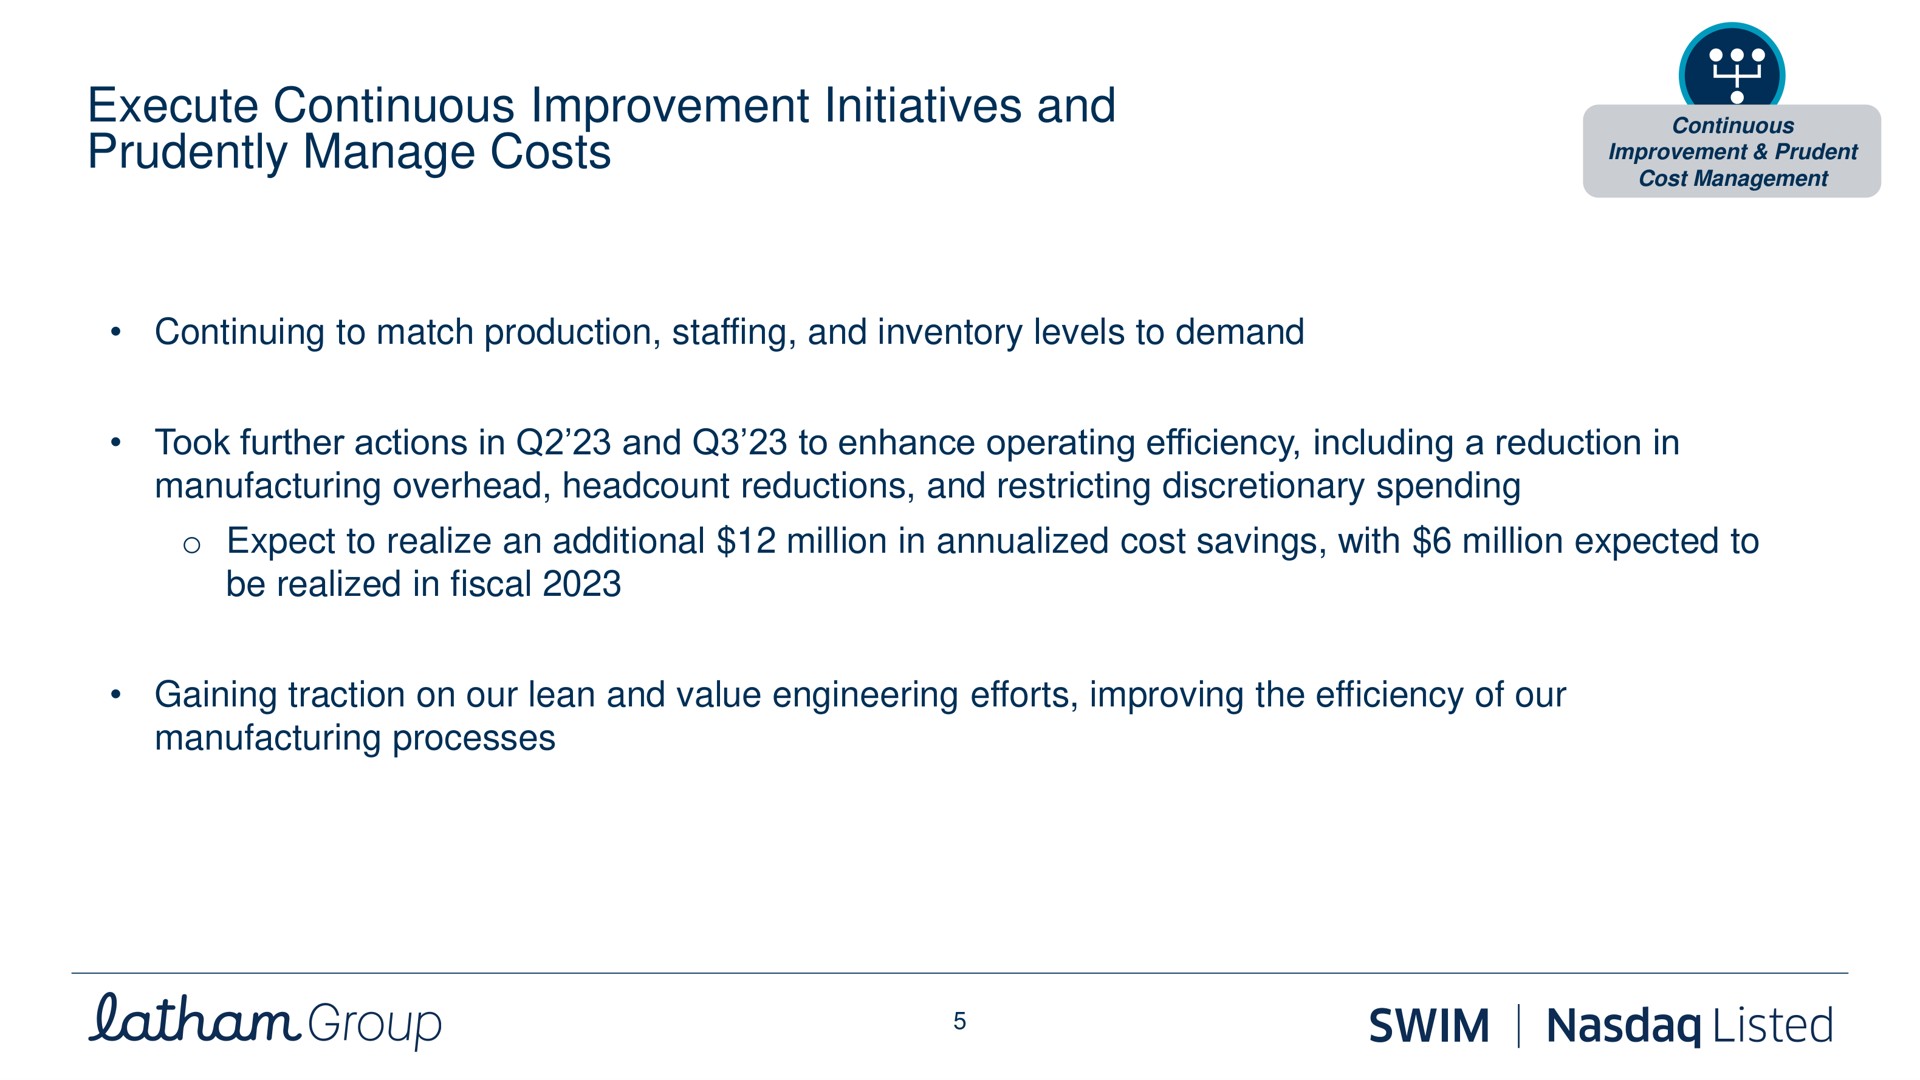 execute continuous improvement initiatives and enhancing and expanding strategic partnerships with grand dealers prudently manage costs continuing to match production staffing and inventory levels to demand took further actions in and to enhance operating efficiency including a reduction in manufacturing overhead reductions and restricting discretionary spending expect to realize an additional million in cost savings with million expected to be realized in fiscal gaining traction on our lean and value engineering efforts improving the efficiency of our manufacturing processes prudent group swim listed | Latham Pool Company